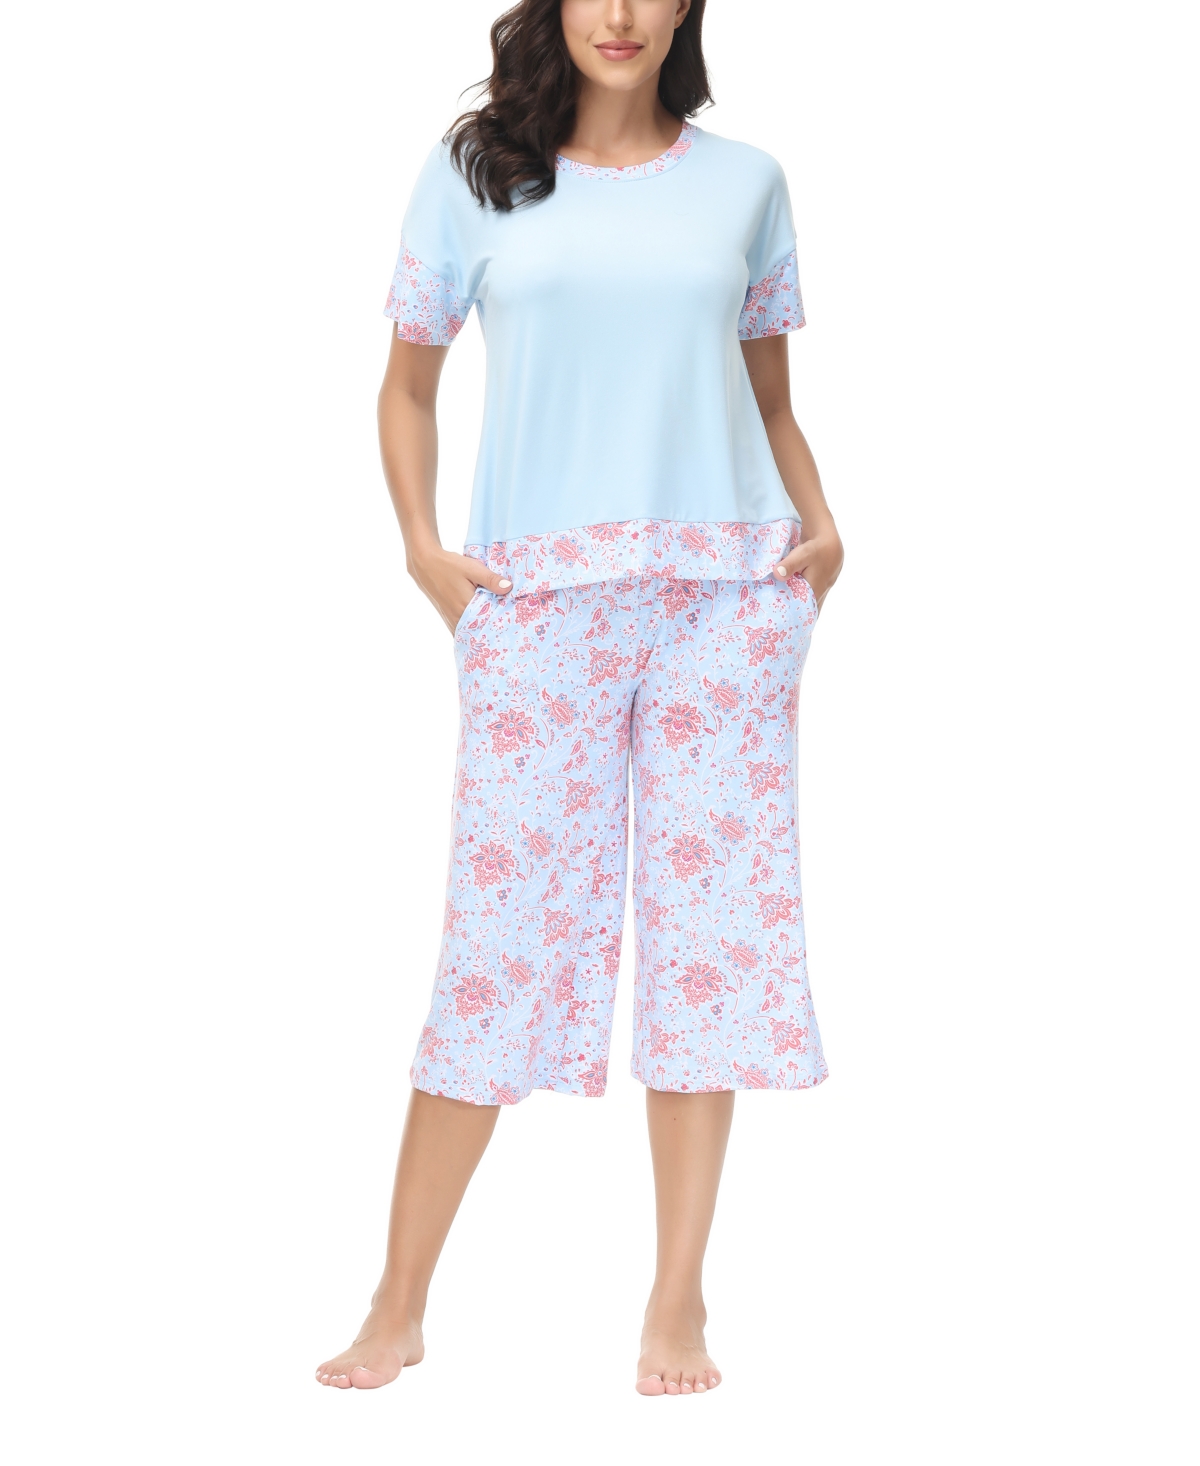 Women's Solid Short Sleeve T-shirt with Printed Capri 2 Piece Pajama Set - Blossom Floral